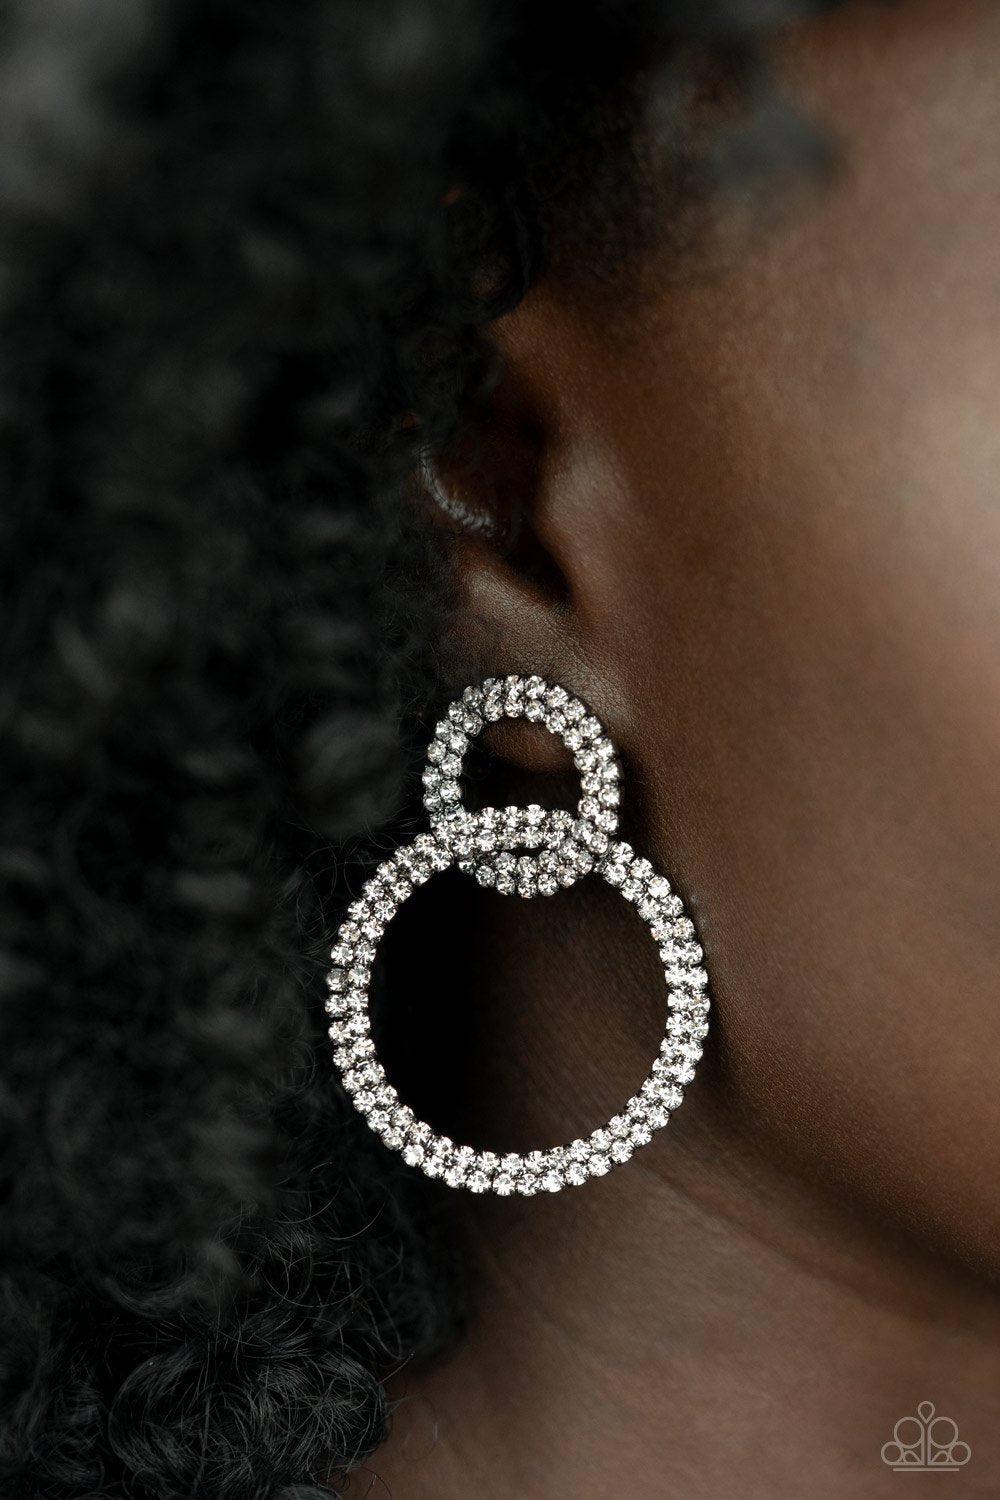 Intensely Icy Gunmetal Black and White Rhinestone Earrings - Paparazzi Accessories- model - CarasShop.com - $5 Jewelry by Cara Jewels